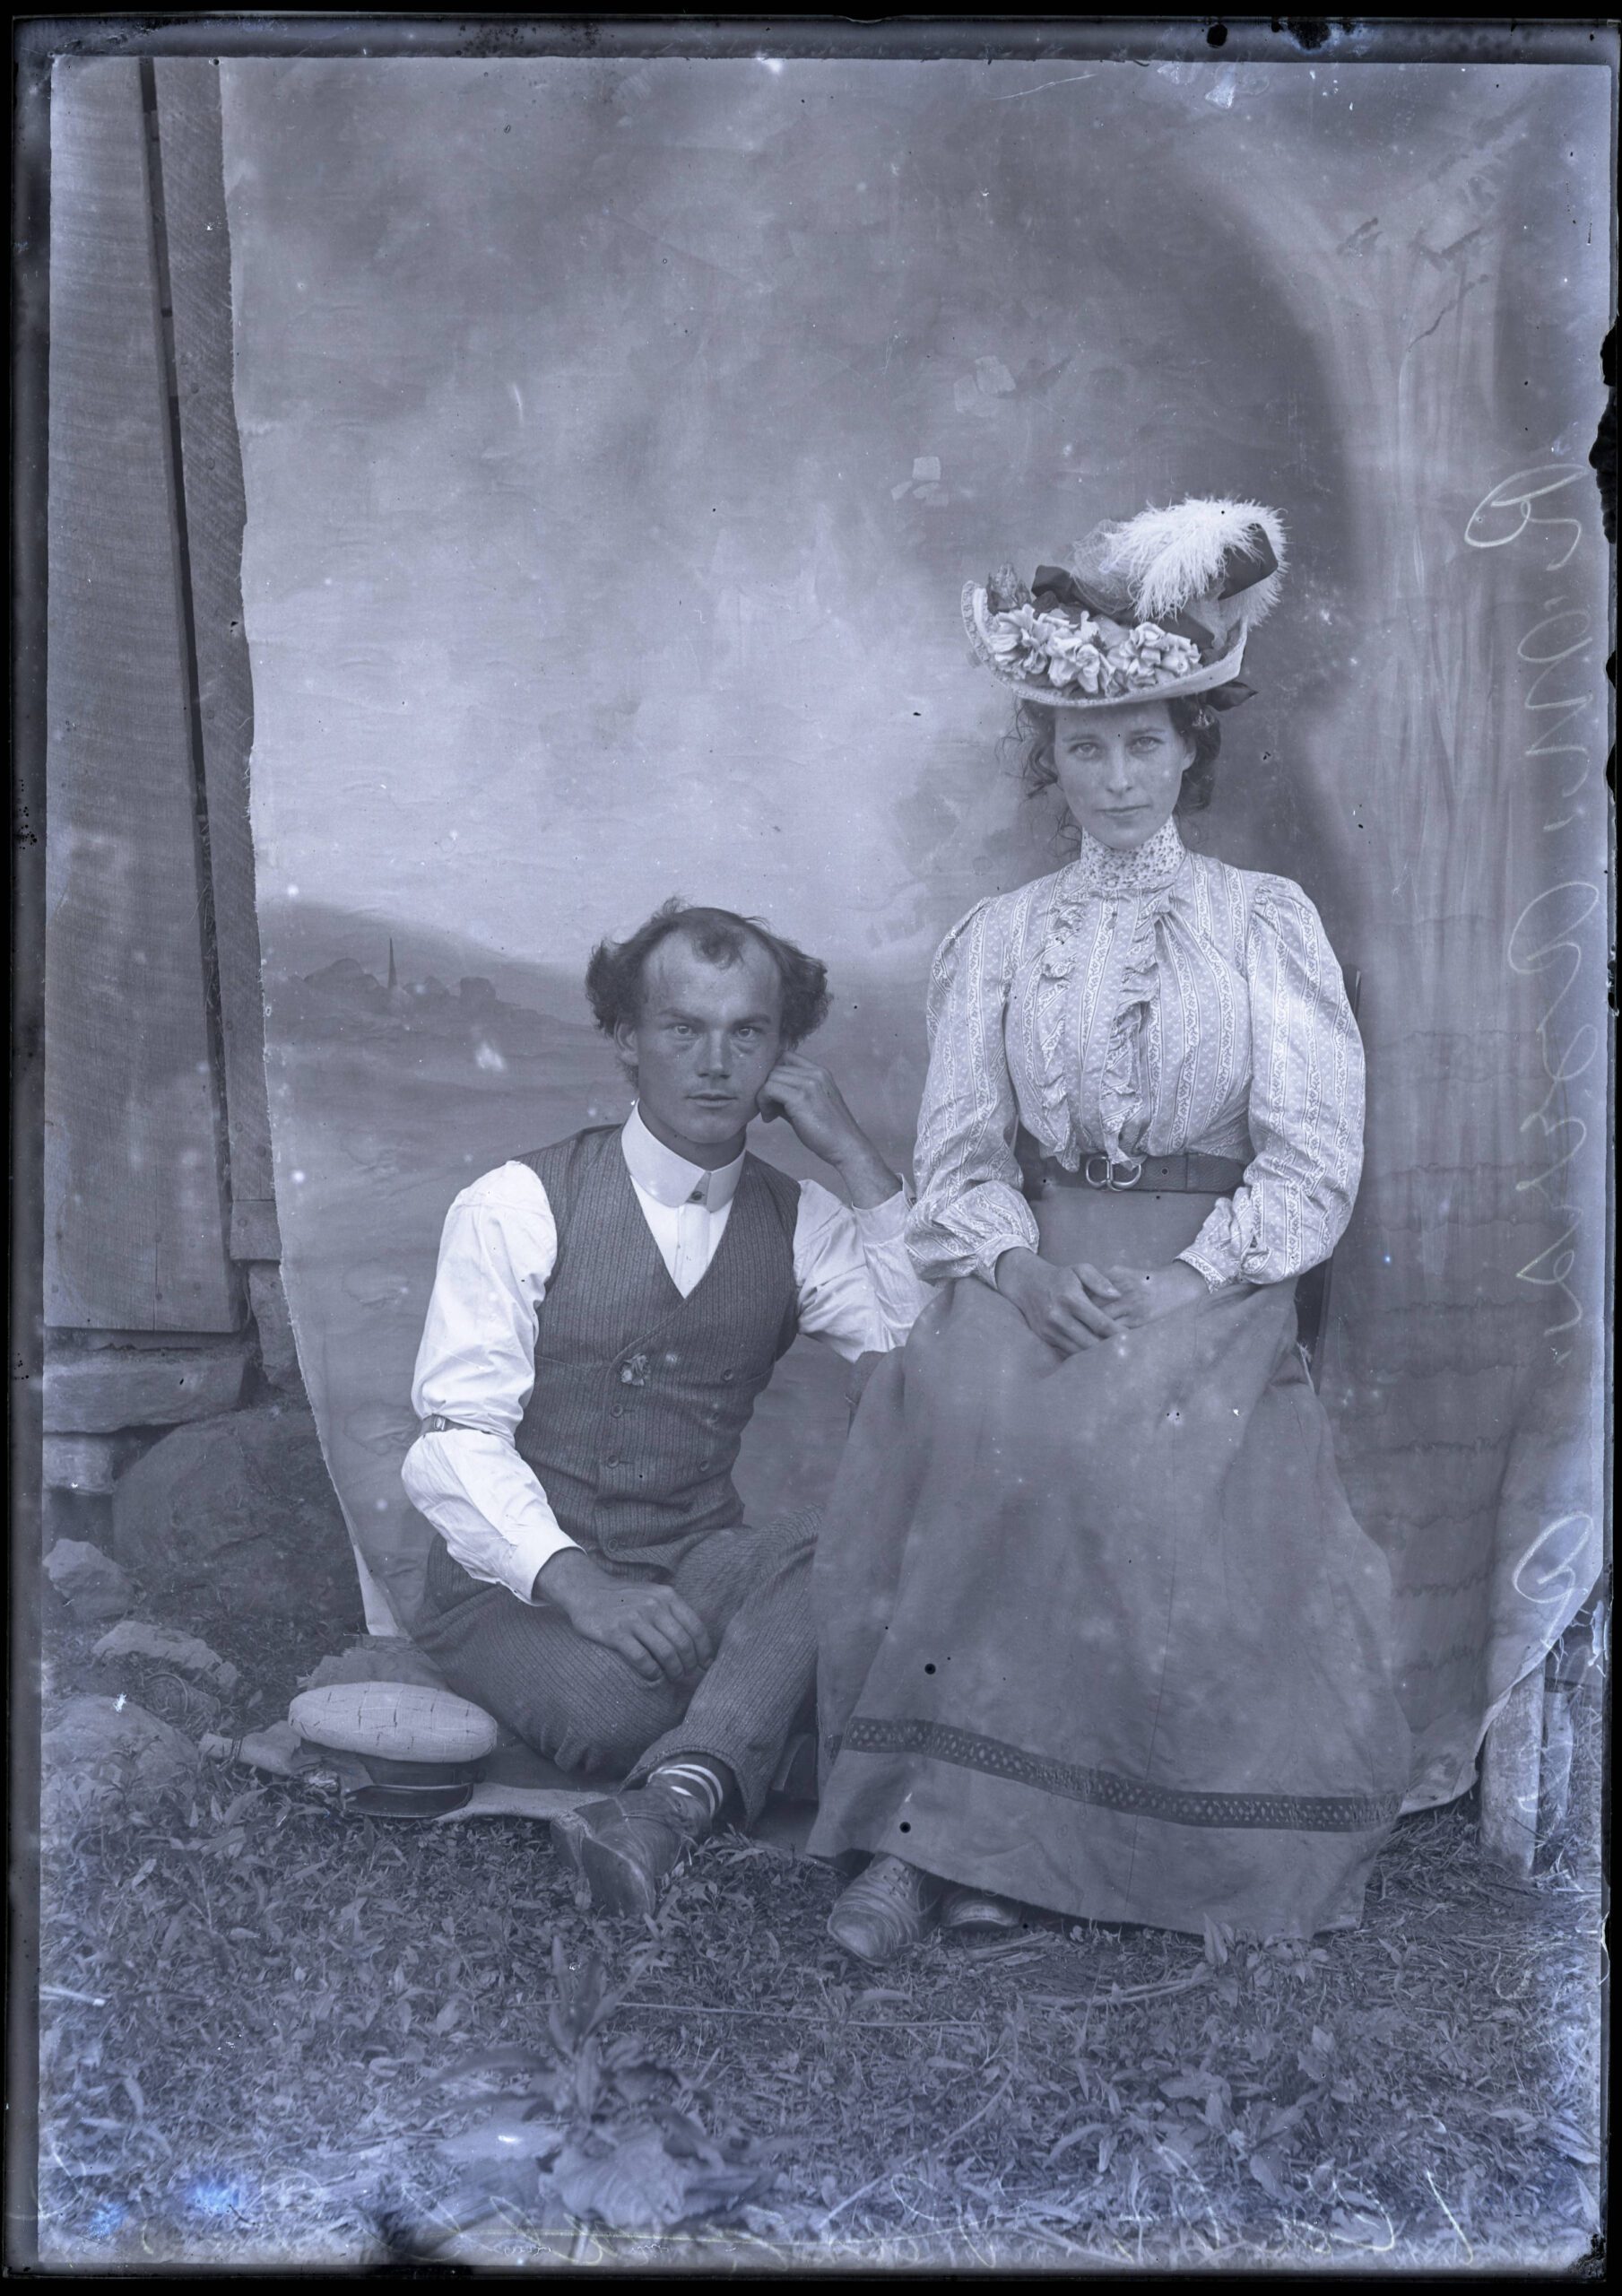 Black and white photo of a couple from the 1890s